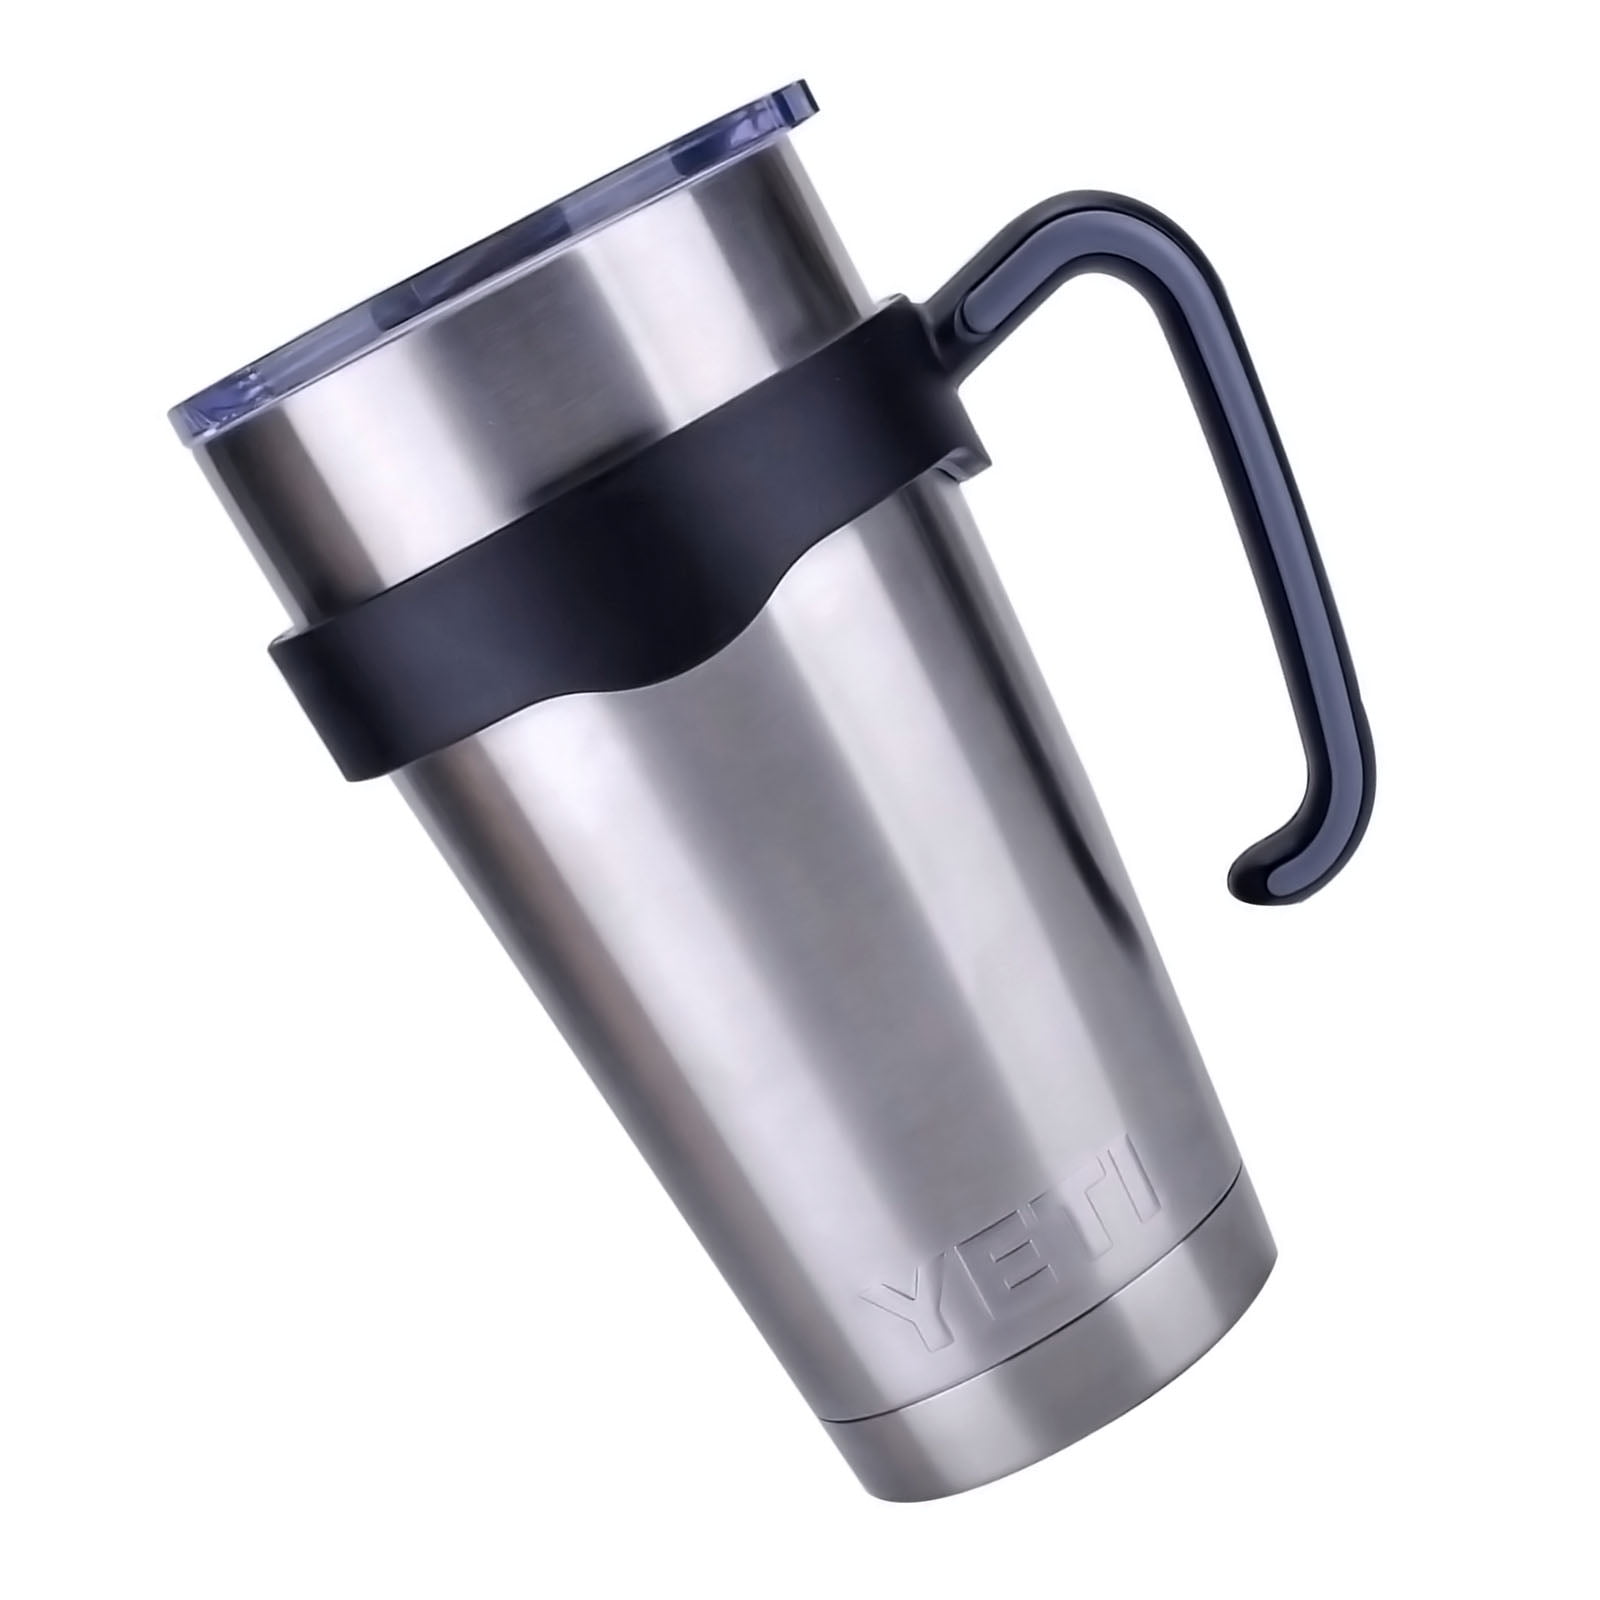 ALIENSX Tumbler Handle for YETI 20oz Rambler Cup, Anti Slip Travel Mug Grip  Cup Holder for Stainless Steel Tumblers, Yeti, Ozark Trail, Rtic, Sic and